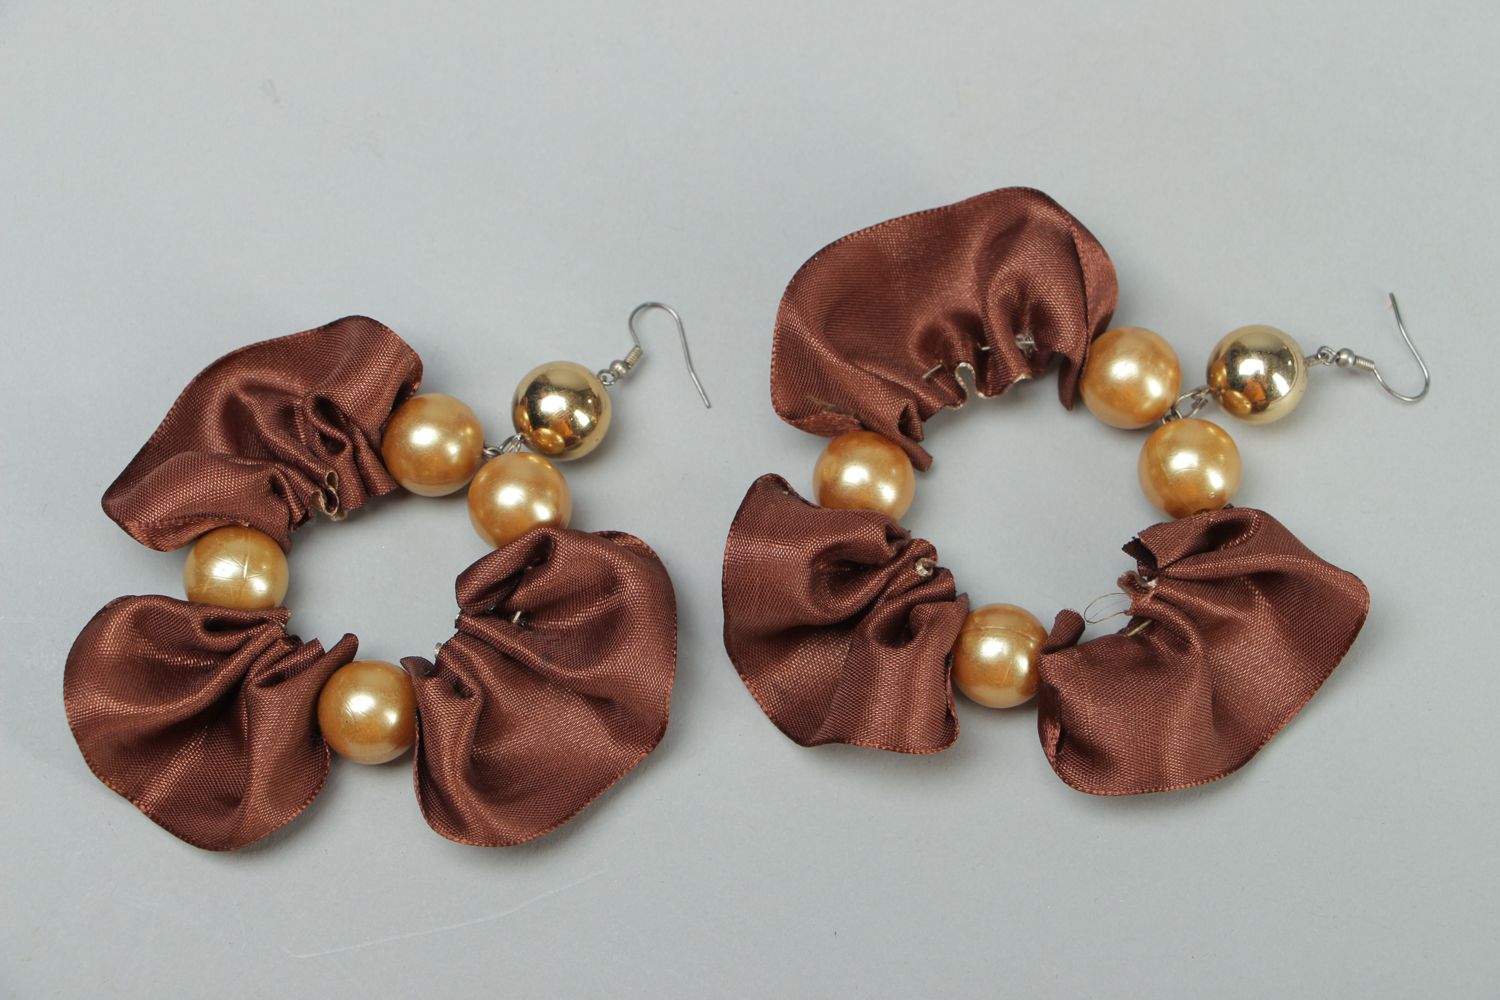 Earrings made of satin ribbons and beads photo 1